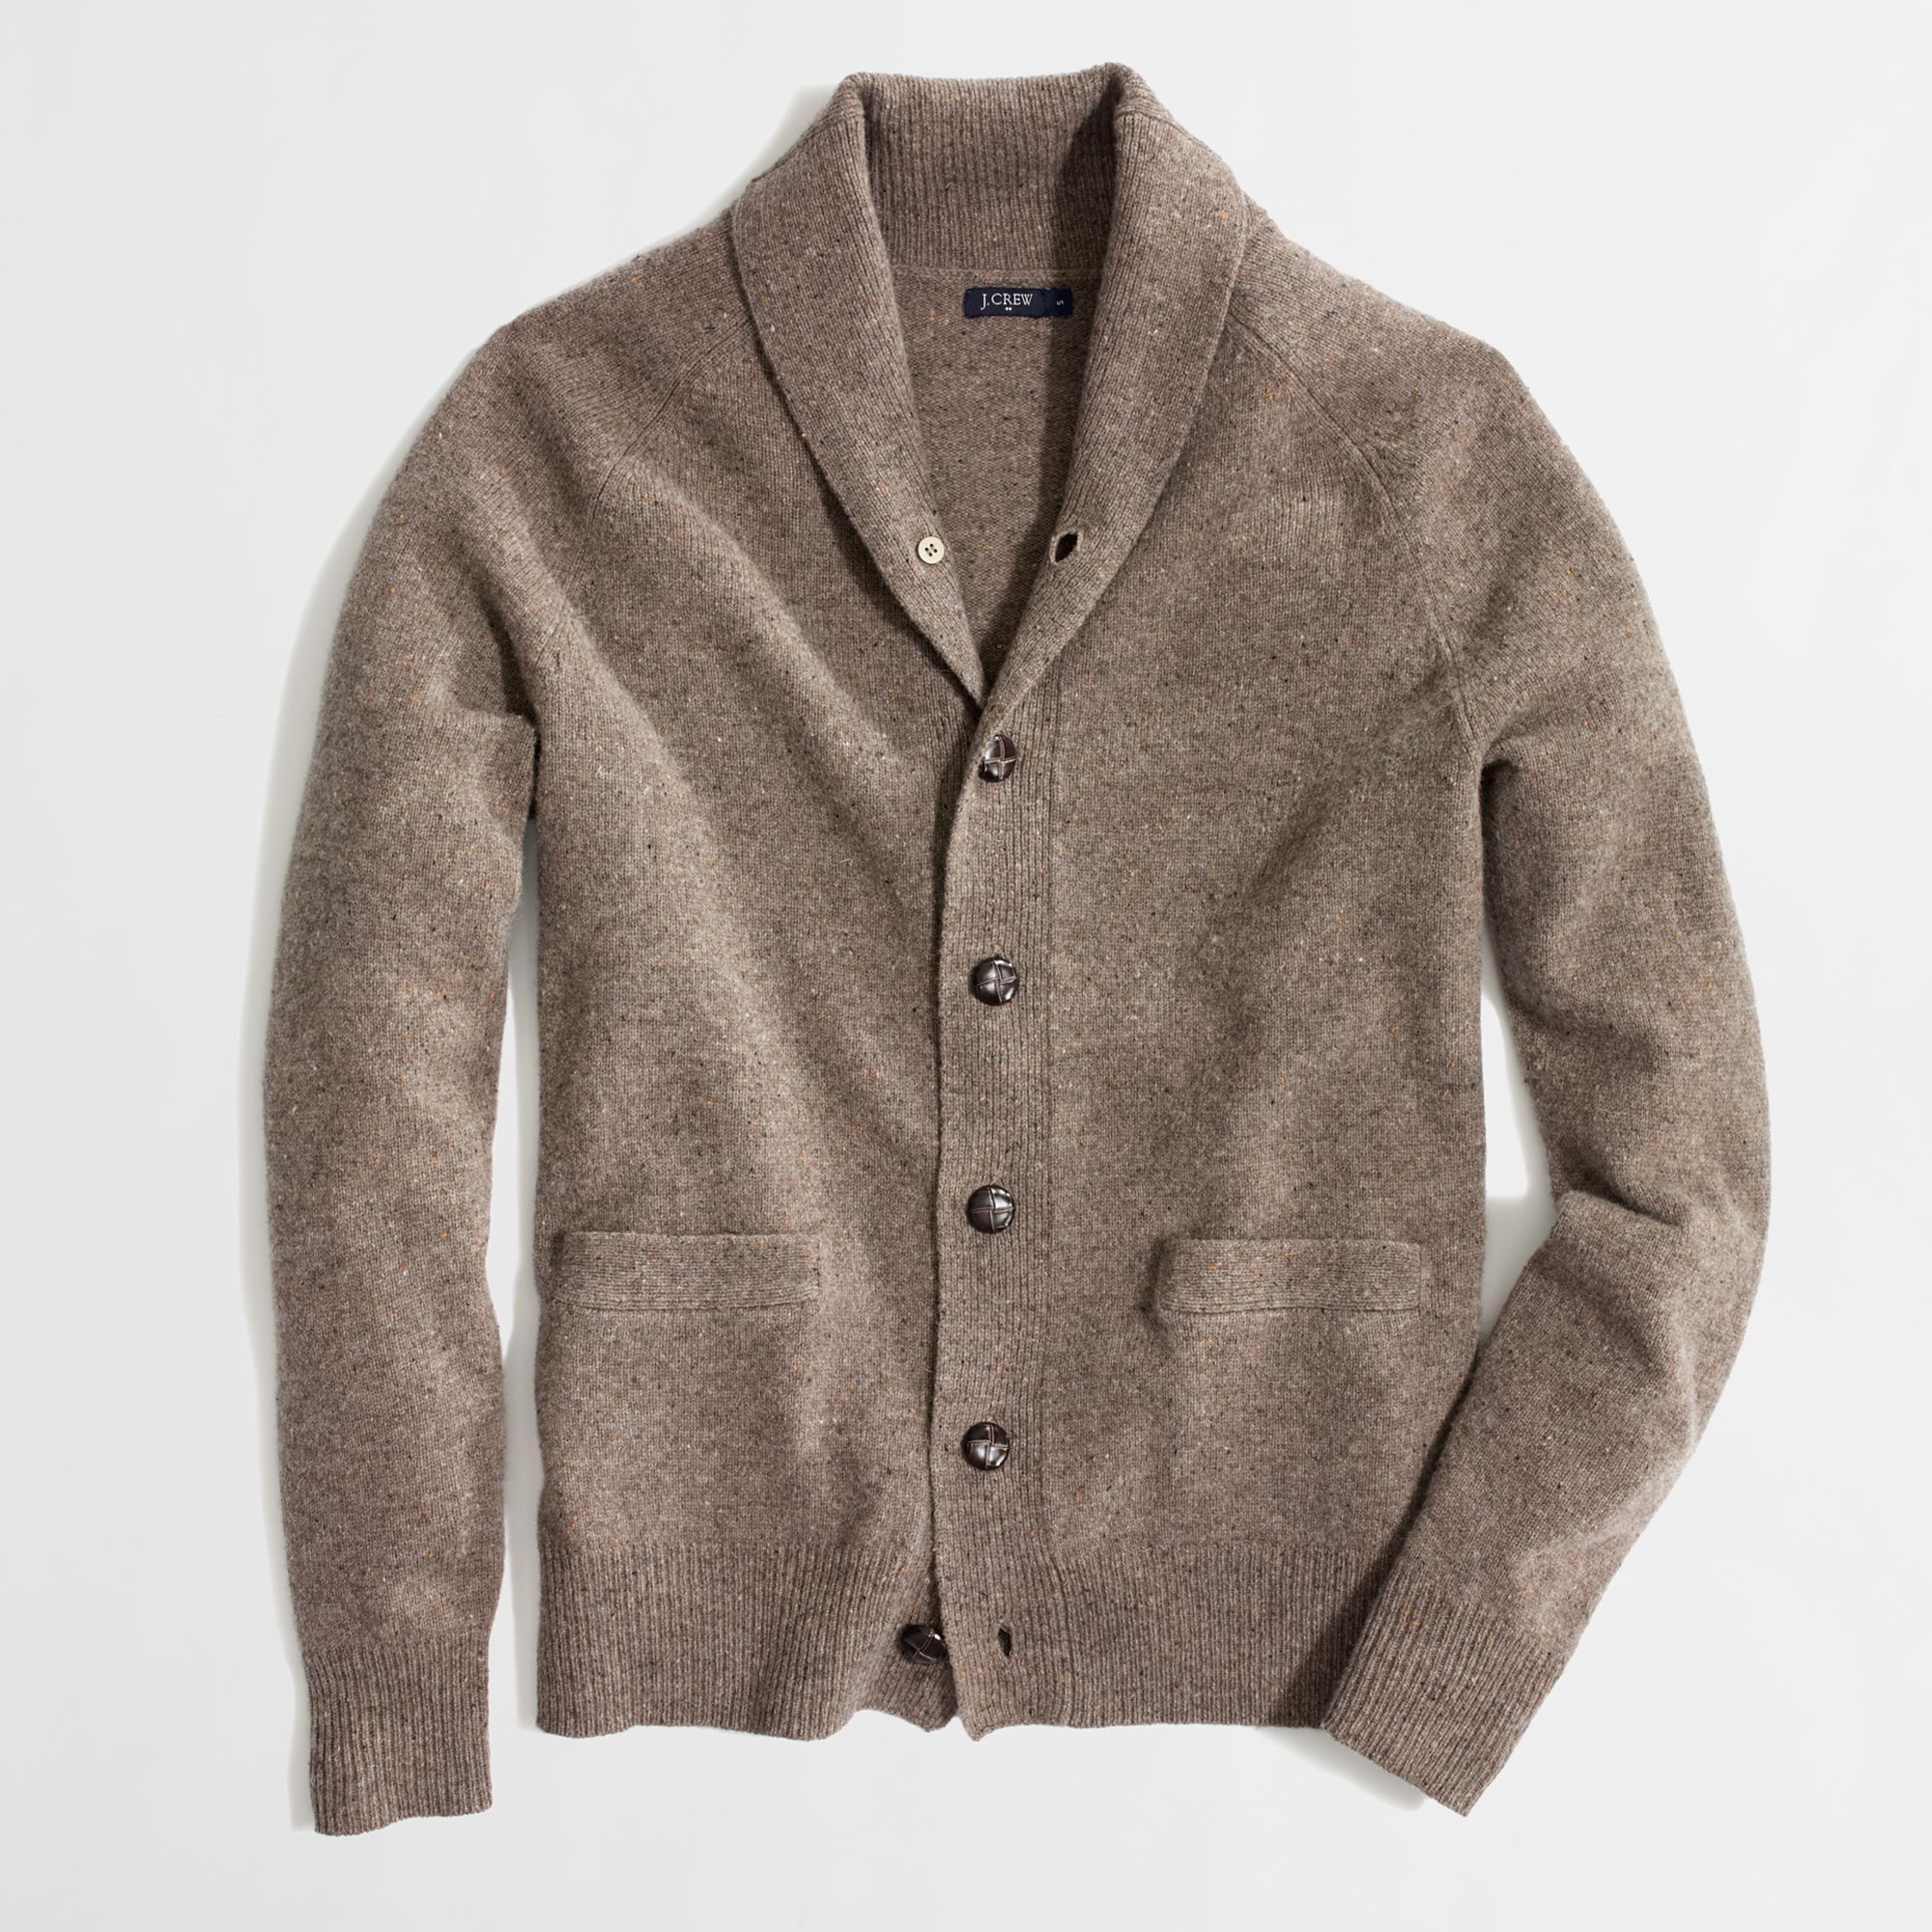 J.Crew Factory Donegal Shawlcollar Cardigan in Brown for Men - Lyst